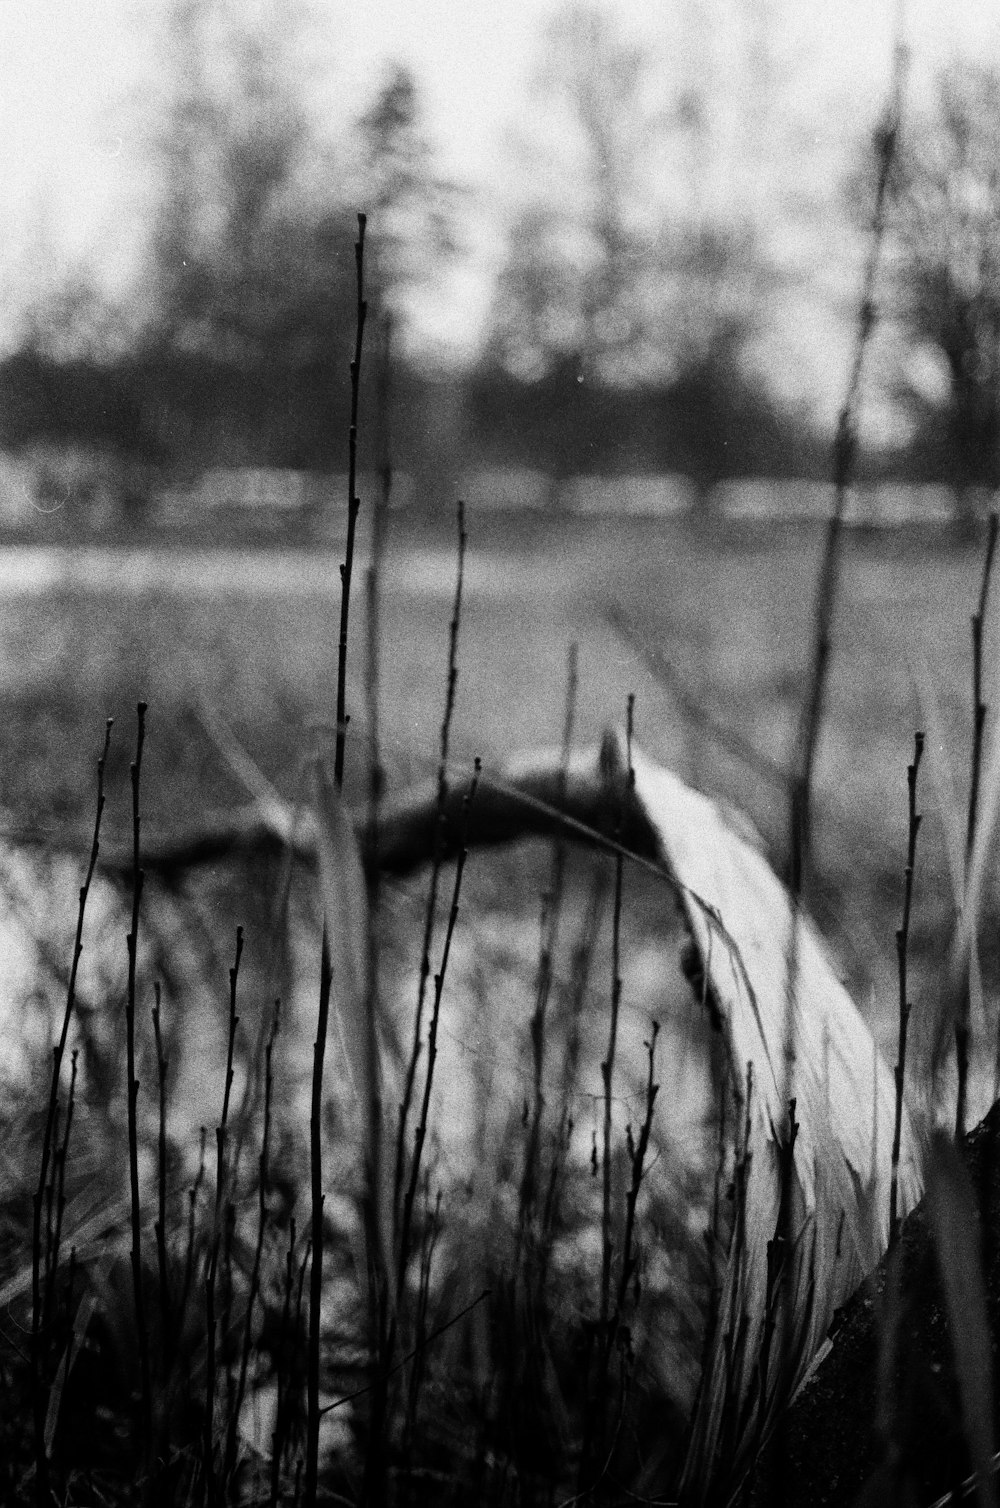 grayscale photo of grass near body of water